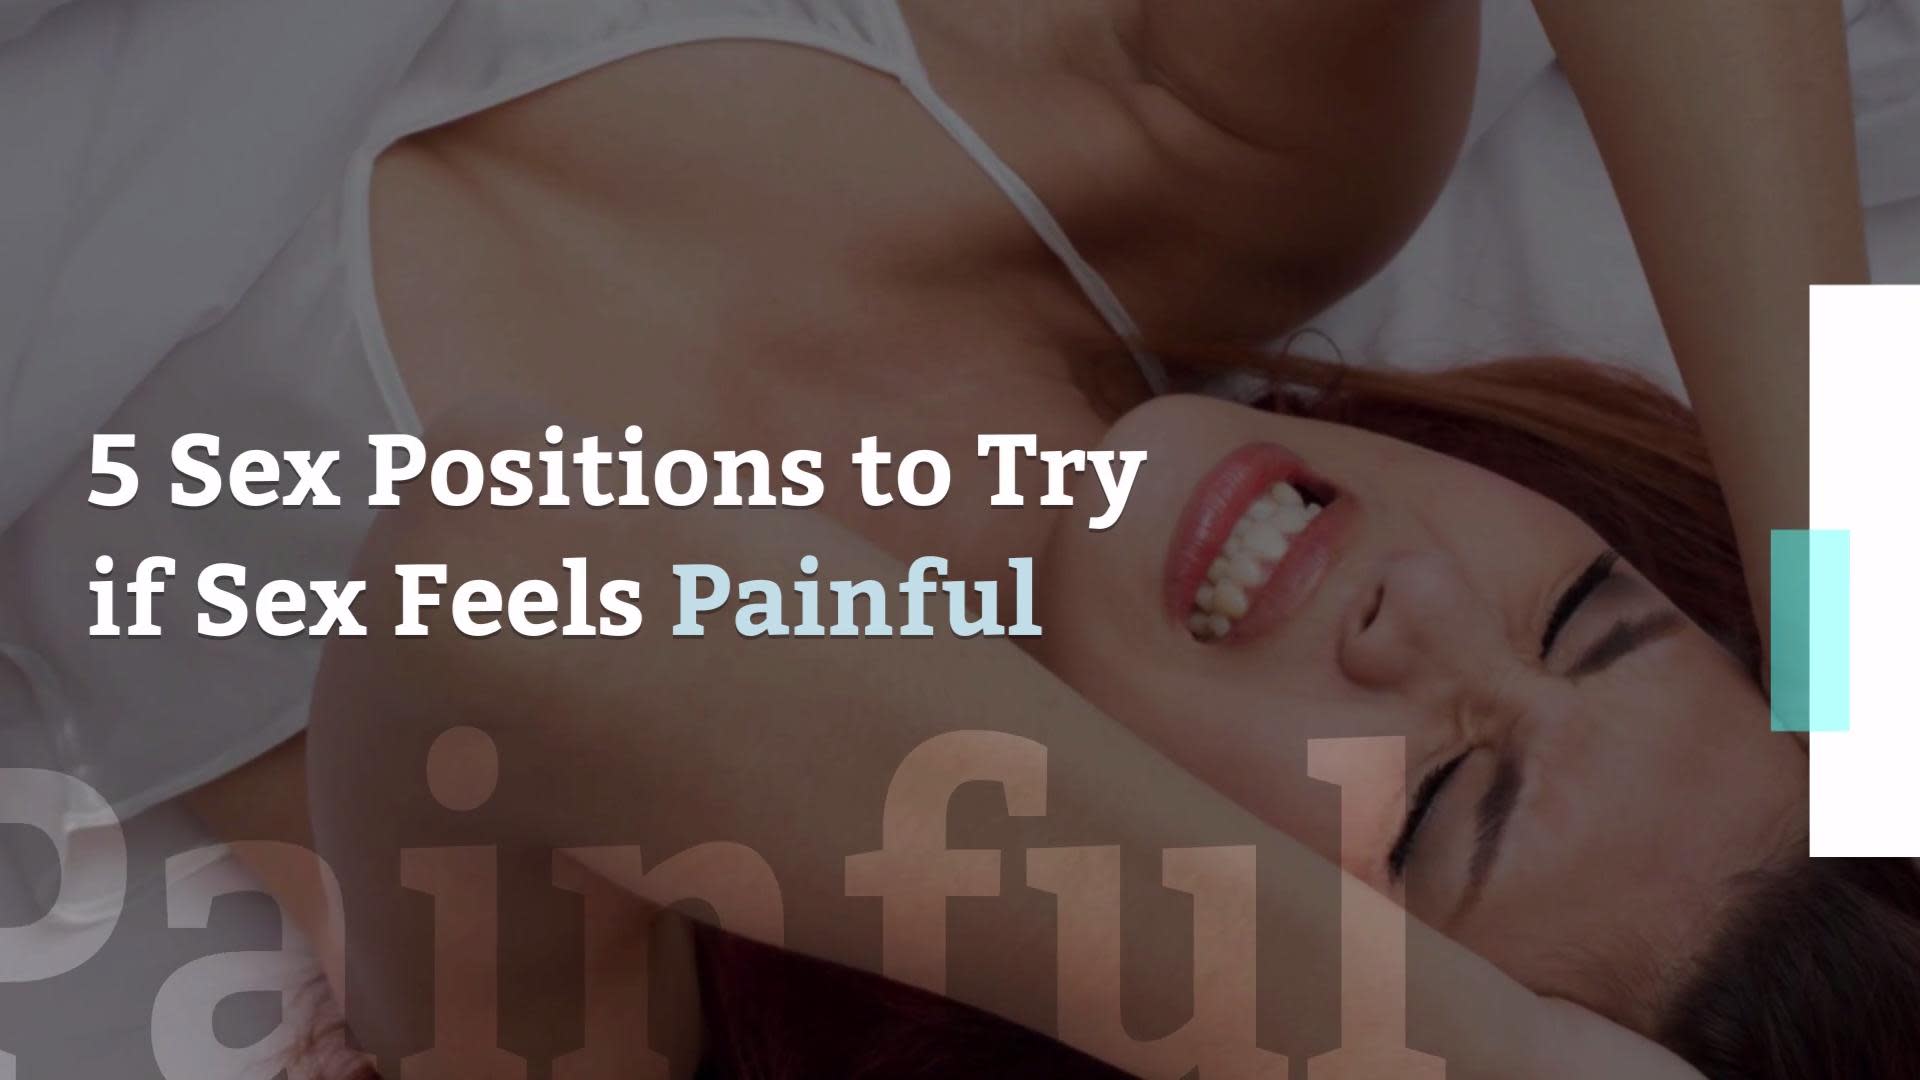 6 Sex Positions to Try if Sex Is Painful image pic